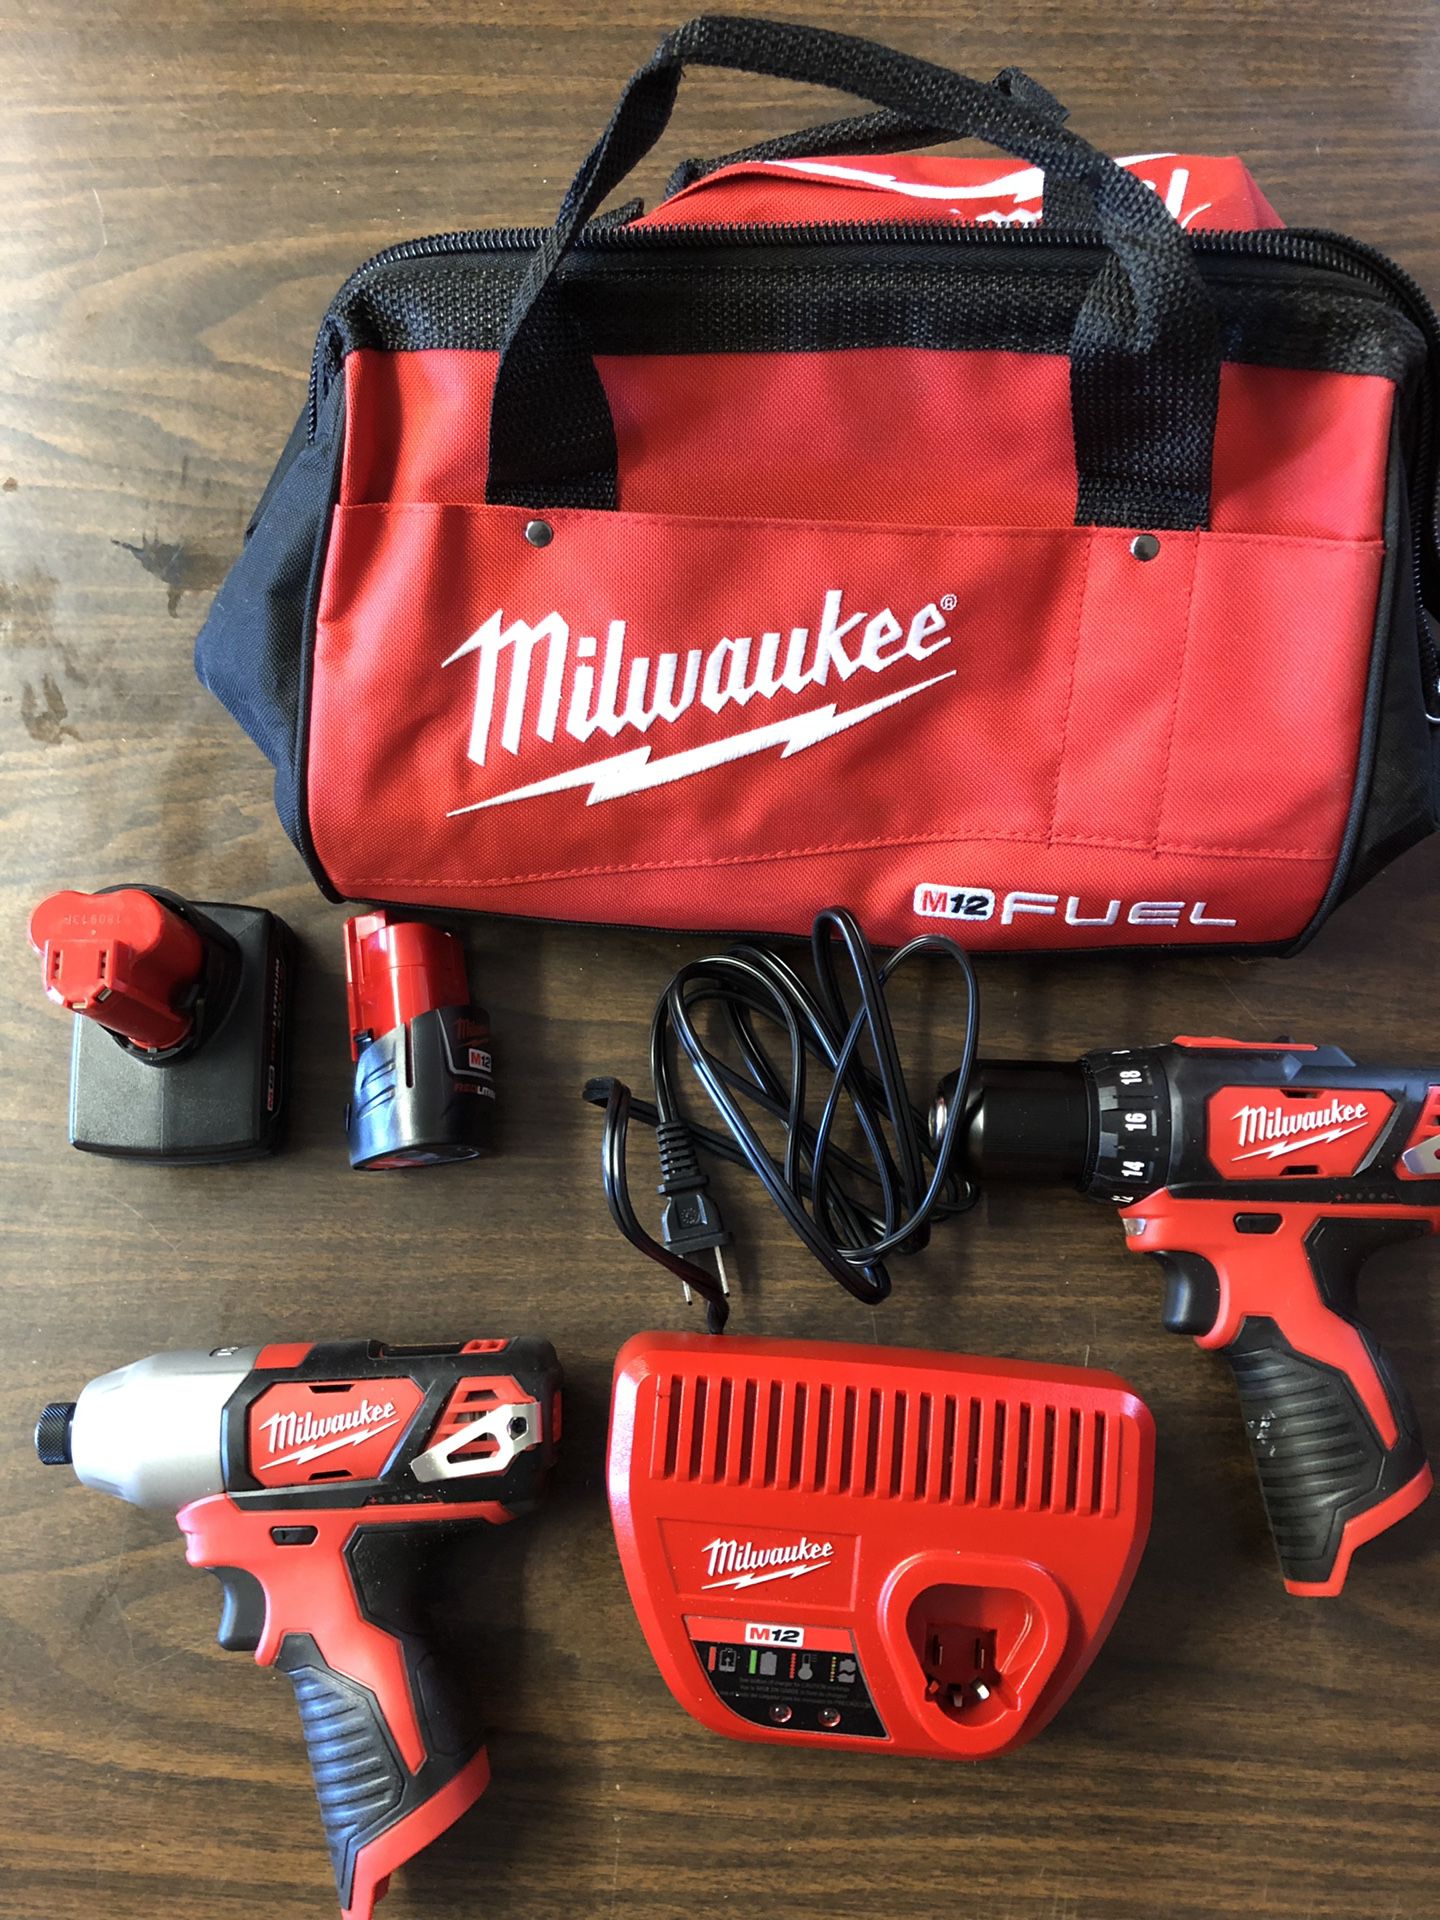 Milwaukee drill and impact drill